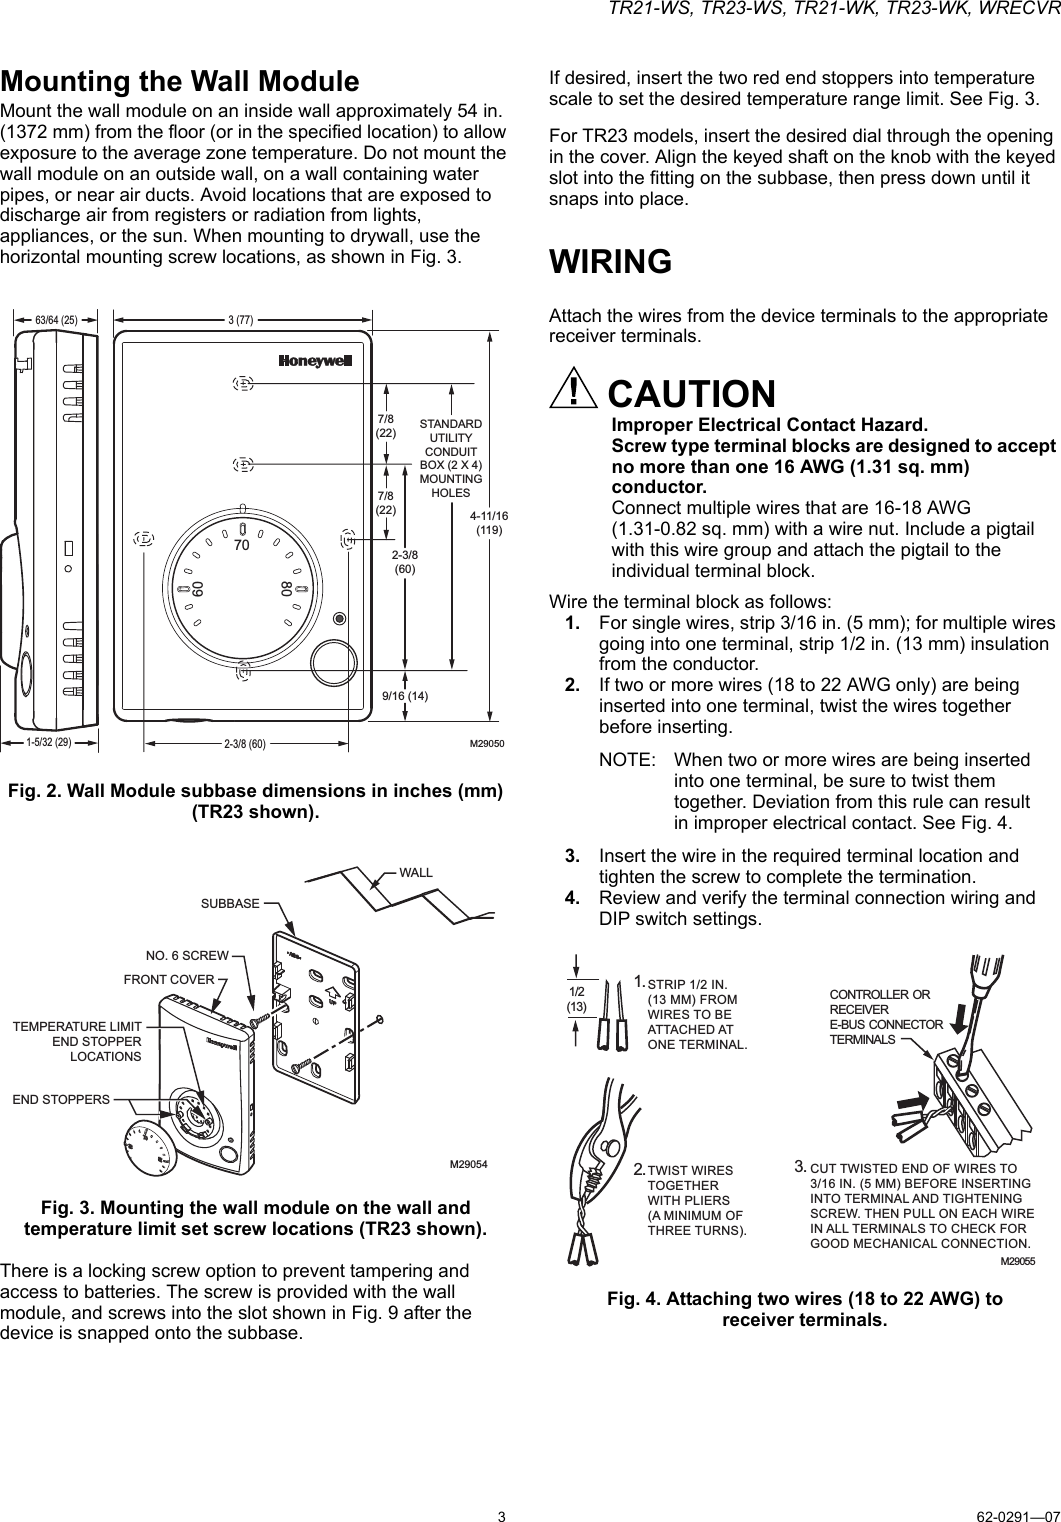 TR21-WS, TR23-WS, TR21-WK, TR23-WK, WRECVR362-0291—07Mounting the Wall ModuleMount the wall module on an inside wall approximately 54 in. (1372 mm) from the floor (or in the specified location) to allow exposure to the average zone temperature. Do not mount the wall module on an outside wall, on a wall containing water pipes, or near air ducts. Avoid locations that are exposed to discharge air from registers or radiation from lights, appliances, or the sun. When mounting to drywall, use the horizontal mounting screw locations, as shown in Fig. 3.Fig. 2. Wall Module subbase dimensions in inches (mm) (TR23 shown).Fig. 3. Mounting the wall module on the wall and temperature limit set screw locations (TR23 shown).There is a locking screw option to prevent tampering and access to batteries. The screw is provided with the wall module, and screws into the slot shown in Fig. 9 after the device is snapped onto the subbase.If desired, insert the two red end stoppers into temperature scale to set the desired temperature range limit. See Fig. 3.For TR23 models, insert the desired dial through the opening in the cover. Align the keyed shaft on the knob with the keyed slot into the fitting on the subbase, then press down until it snaps into place.WIRINGAttach the wires from the device terminals to the appropriate receiver terminals.CAUTIONImproper Electrical Contact Hazard.Screw type terminal blocks are designed to accept no more than one 16 AWG (1.31 sq. mm) conductor.Connect multiple wires that are 16-18 AWG (1.31-0.82 sq. mm) with a wire nut. Include a pigtail with this wire group and attach the pigtail to the individual terminal block.Wire the terminal block as follows:1. For single wires, strip 3/16 in. (5 mm); for multiple wires going into one terminal, strip 1/2 in. (13 mm) insulation from the conductor.2. If two or more wires (18 to 22 AWG only) are being inserted into one terminal, twist the wires together before inserting.NOTE: When two or more wires are being inserted into one terminal, be sure to twist them together. Deviation from this rule can result in improper electrical contact. See Fig. 4.3. Insert the wire in the required terminal location and tighten the screw to complete the termination.4. Review and verify the terminal connection wiring and DIP switch settings.Fig. 4. Attaching two wires (18 to 22 AWG) toreceiver terminals.M290506070803 (77)4-11/16(119)1-5/32 (29)63/64 (25)STANDARDUTILITYCONDUITBOX (2 X 4)MOUNTINGHOLES9/16 (14)2-3/8(60)7/8(22)7/8(22)2-3/8 (60)M29054SUBBASENO. 6 SCREWFRONT COVERTEMPERATURE LIMITEND STOPPERLOCATIONSEND STOPPERSWALL1/2(13)STRIP 1/2 IN. (13 MM) FROM WIRES TO BE ATTACHED AT ONE TERMINAL.1.2.TWIST WIRES TOGETHER WITH PLIERS (A MINIMUM OF THREE TURNS).3.CUT TWISTED END OF WIRES TO 3/16 IN. (5 MM) BEFORE INSERTING INTO TERMINAL AND TIGHTENINGSCREW. THEN PULL ON EACH WIREIN ALL TERMINALS TO CHECK FOR GOOD MECHANICAL CONNECTION.M29055CONTROLLER ORRECEIVER E-BUS CONNECTORTERMINALS